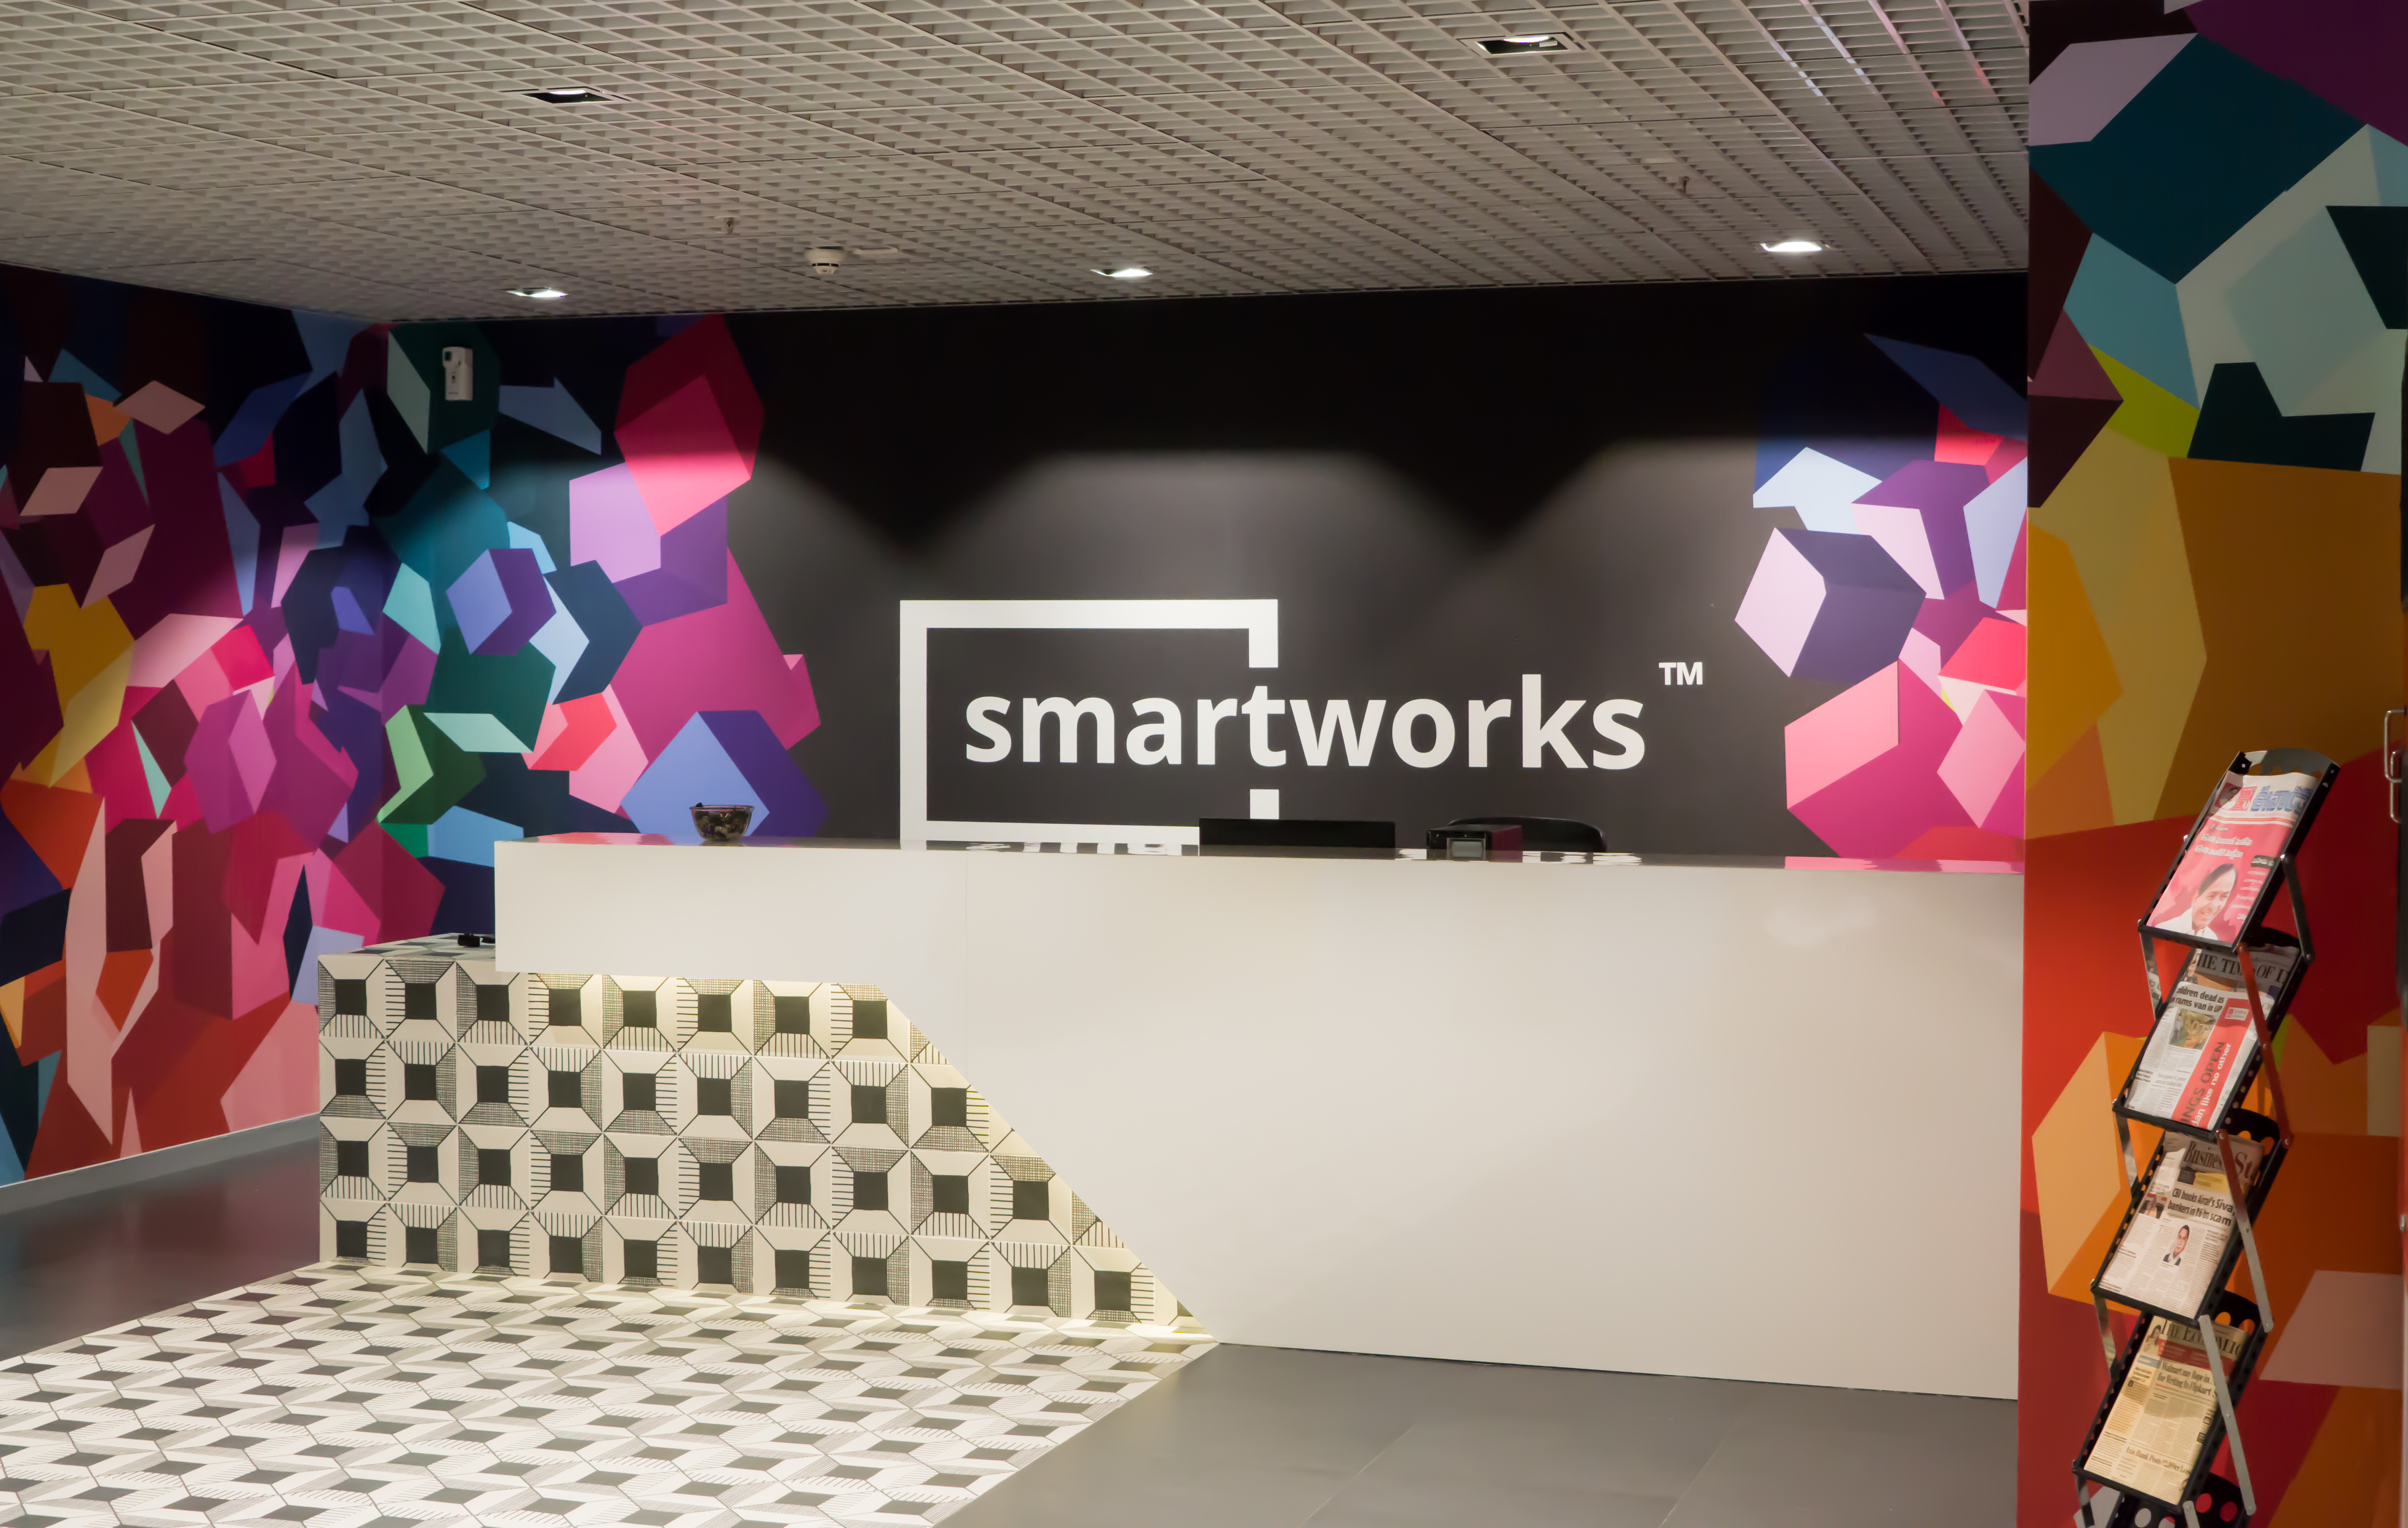 Smartworks, Shared office spaces, Co working spaces, Office space trends, India real estate news, Indian realty news, Real estate news India, Indian property market news, Investment in office spaces, Track2Realty